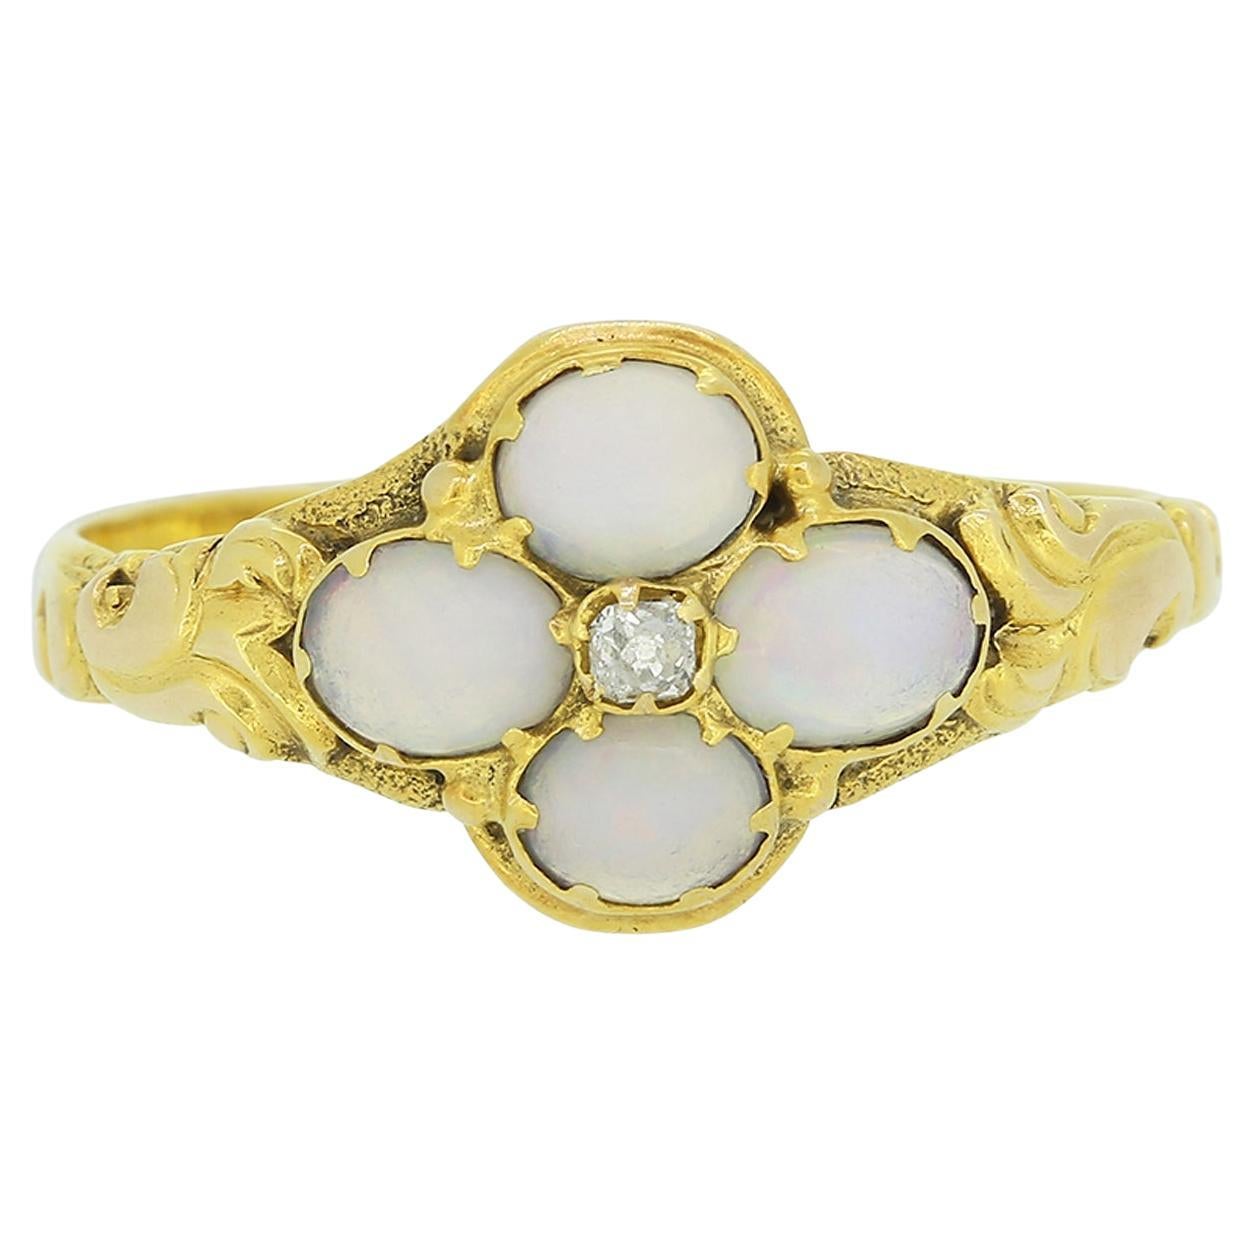 Victorian Opal and Diamond Ring For Sale